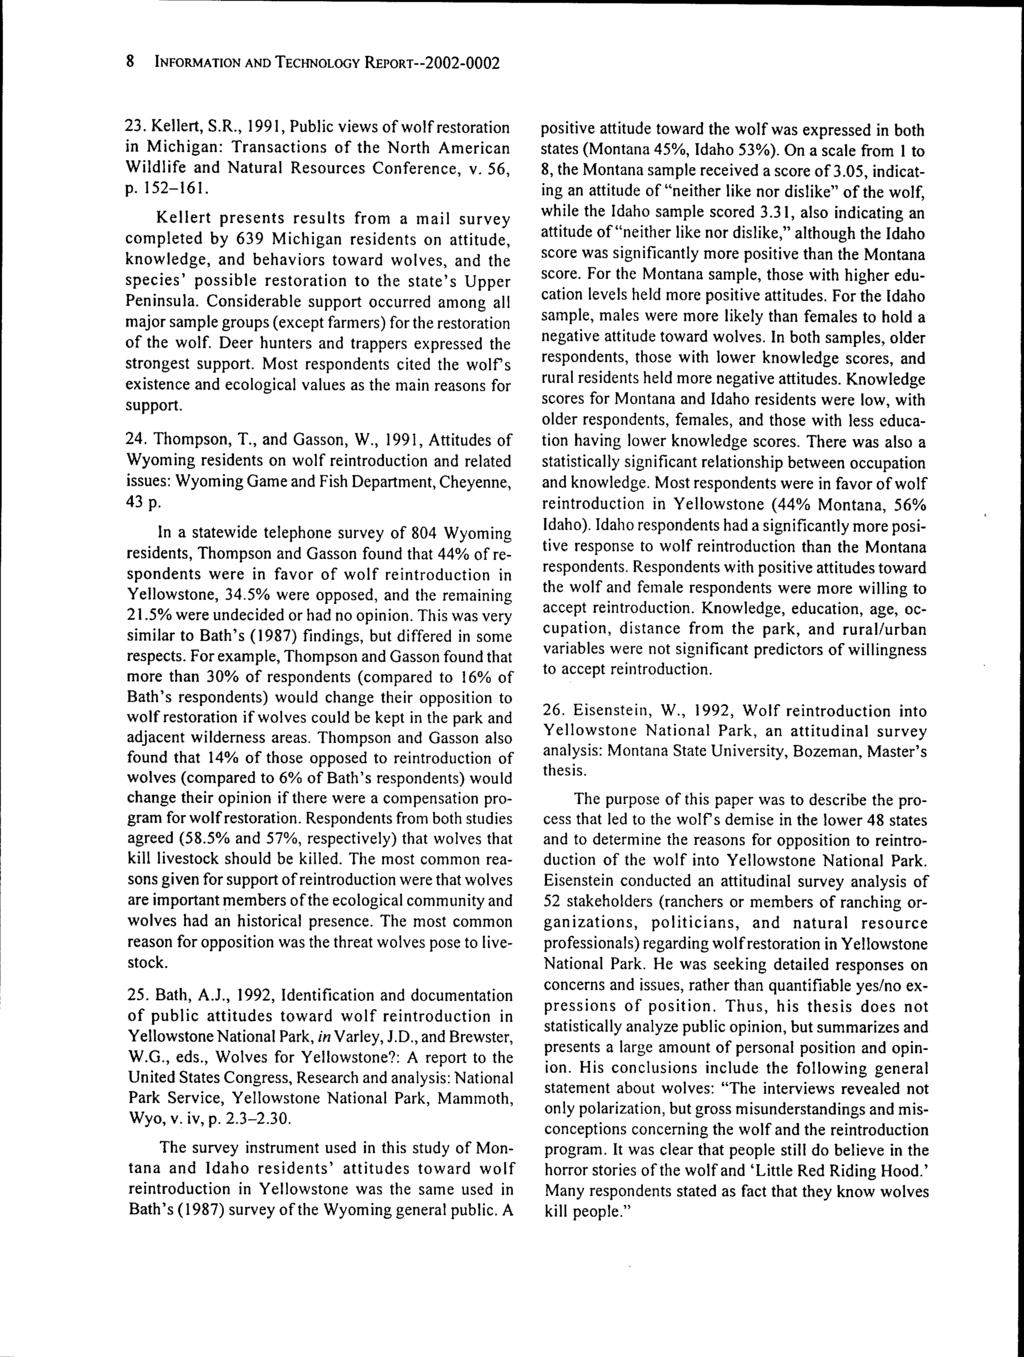 8 INFORMATION AND TECHNOLOGY REPORT--2002-0002 23. Kellert, S.R., 1991, Public views of wolf restoration in Michigan: Transactions of the North American Wildlife and Natural Resources Conference, v.